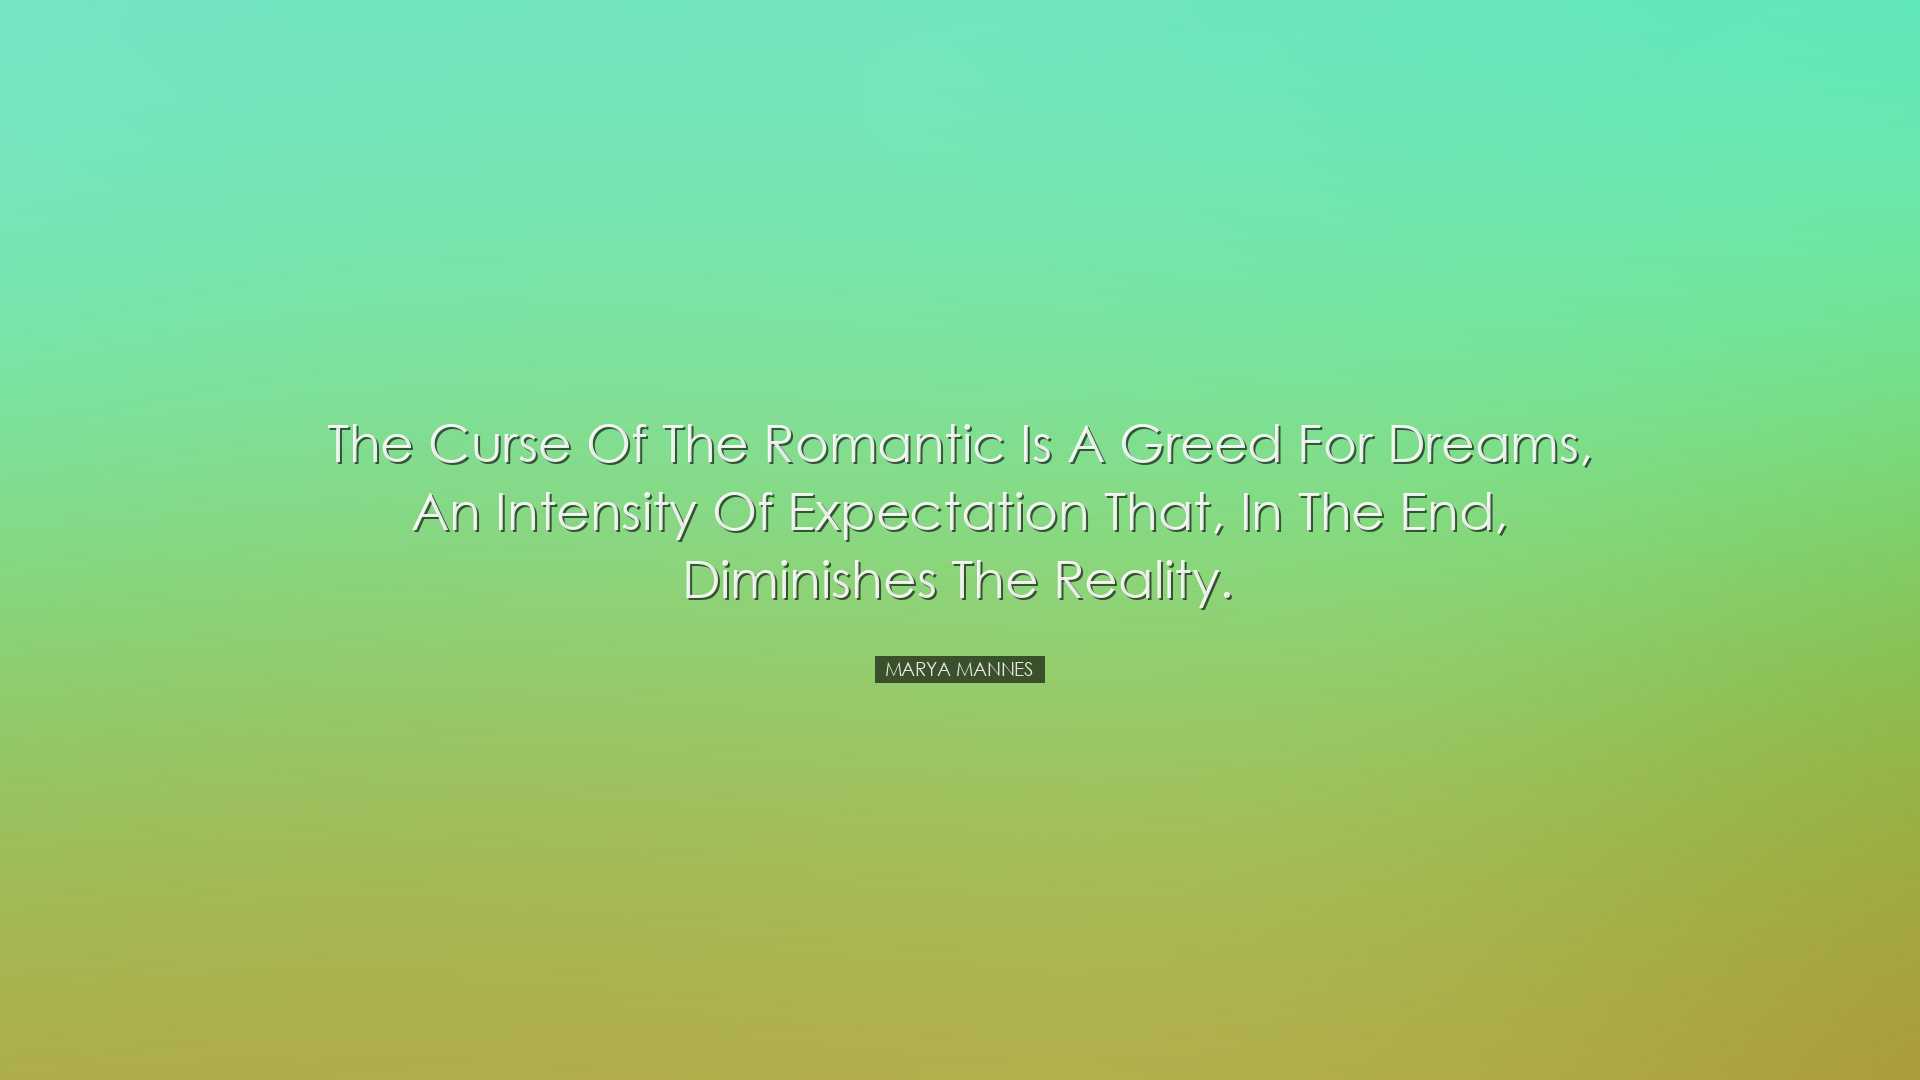 The curse of the romantic is a greed for dreams, an intensity of e